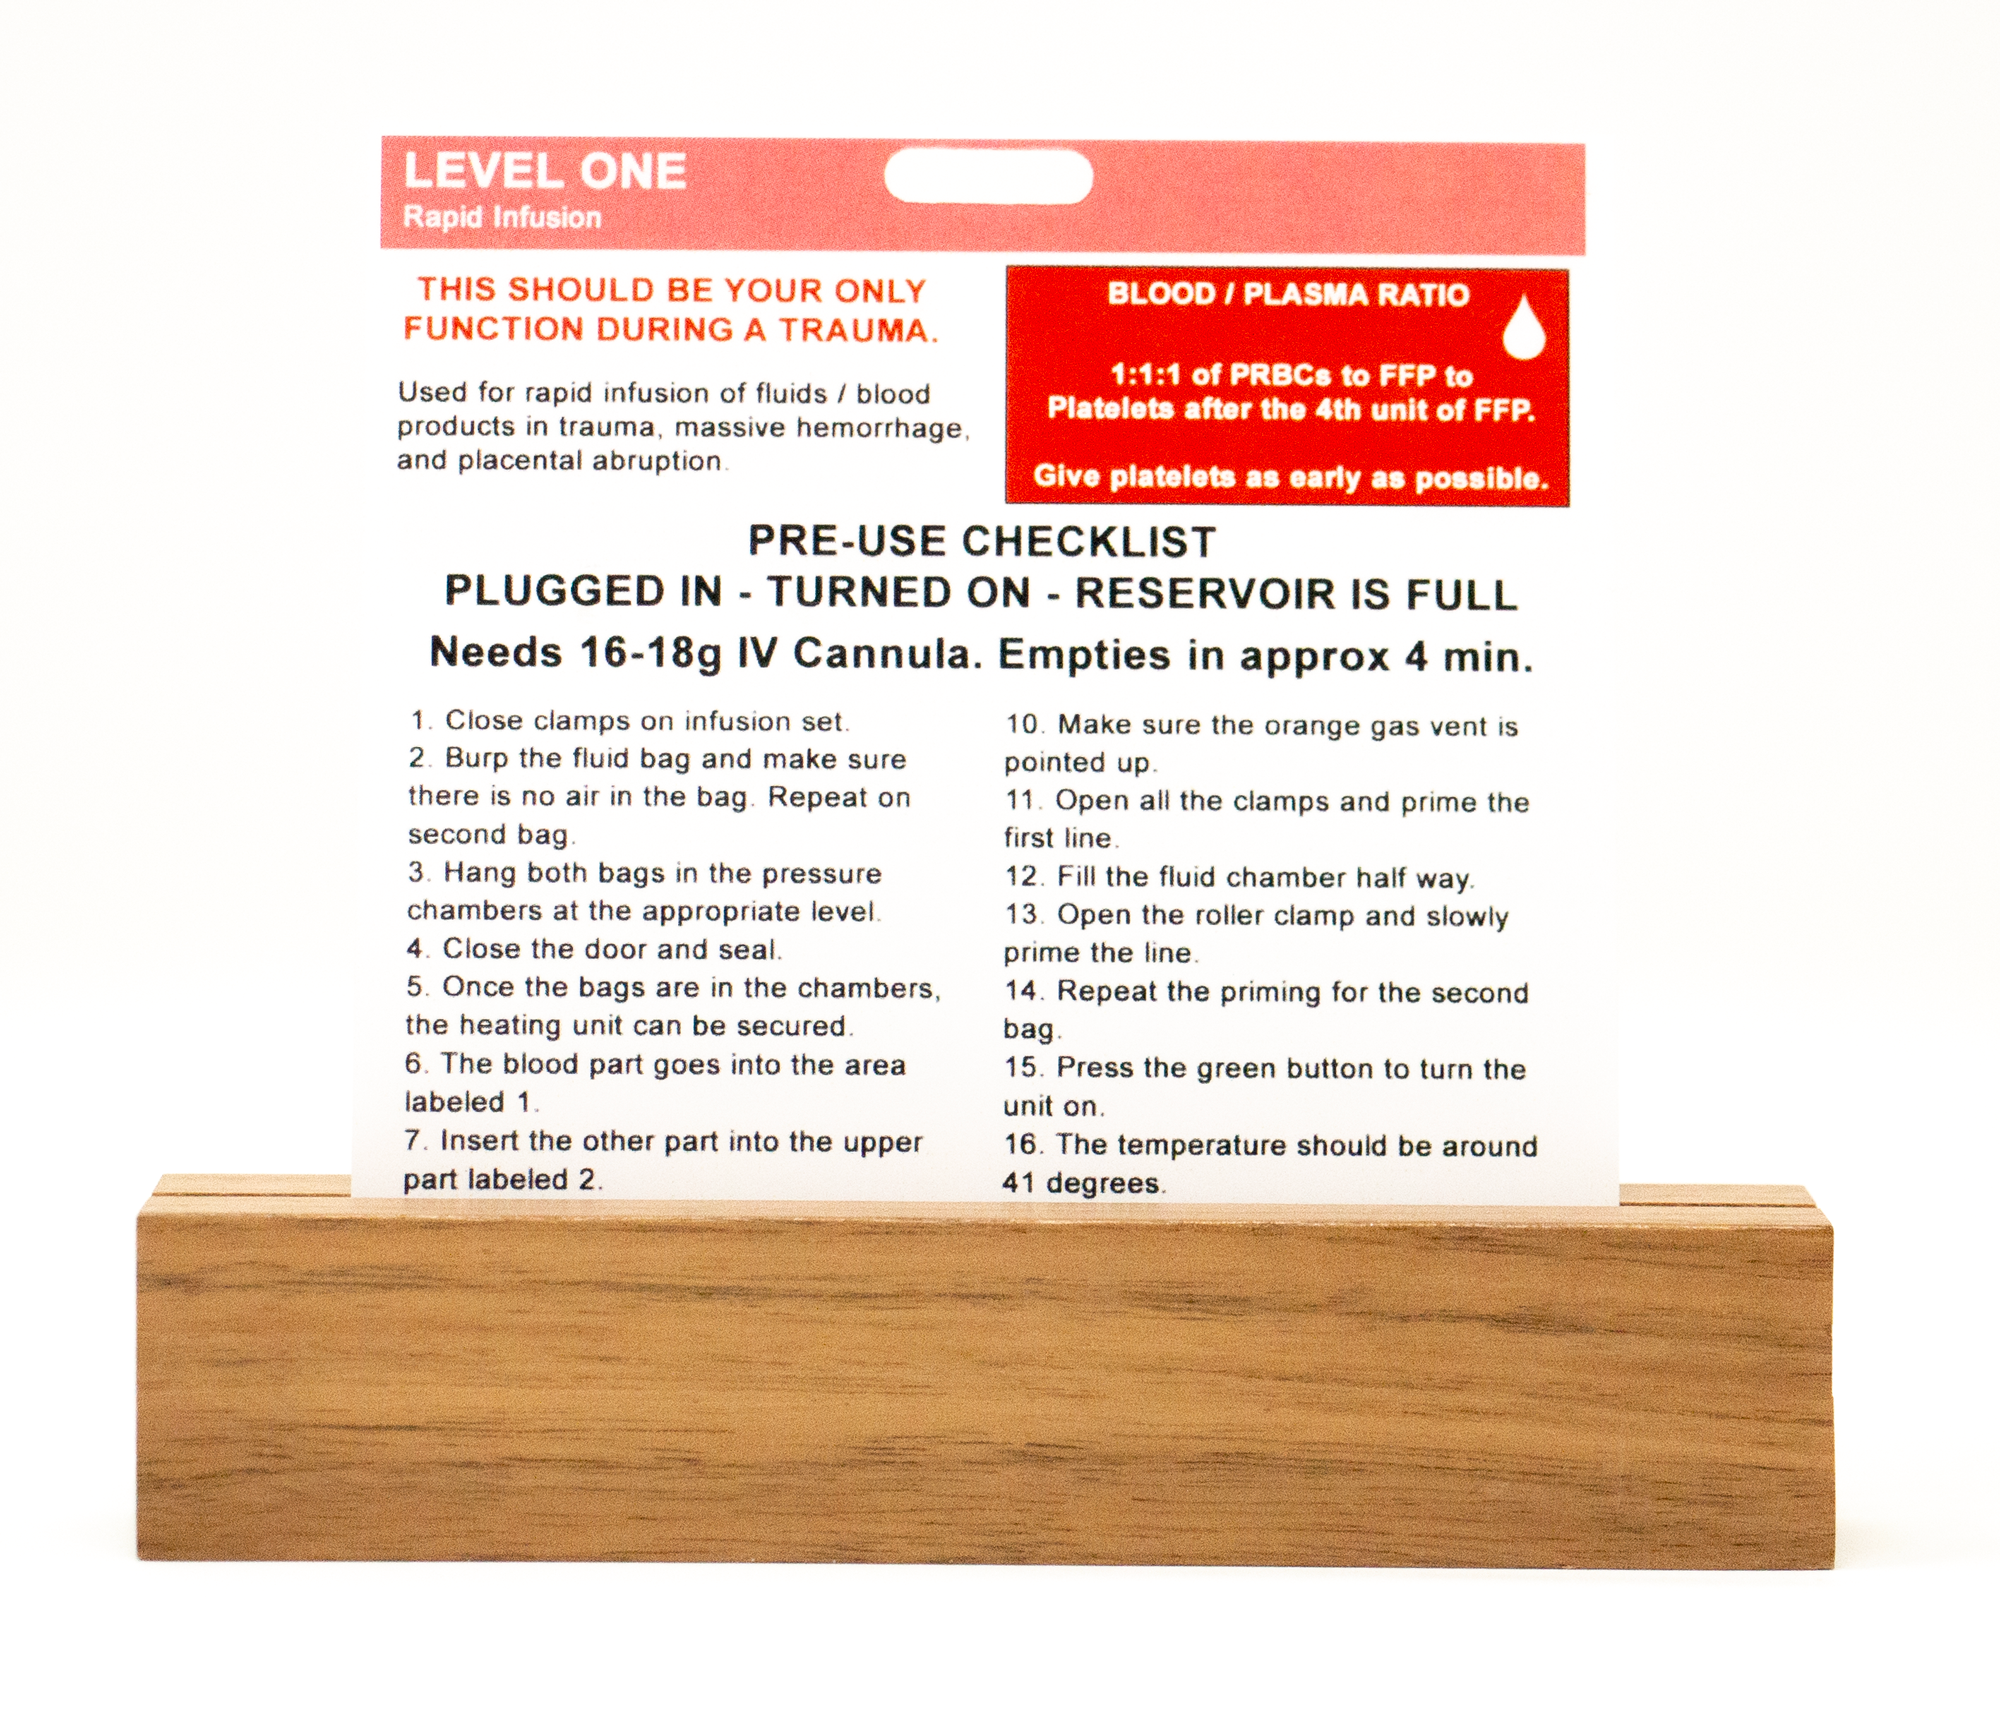 Side one of our Rapid Infusion badge buddy contains information about the Level One Rapid Infuser including directions and requirements as well as blood / plasma ratios.